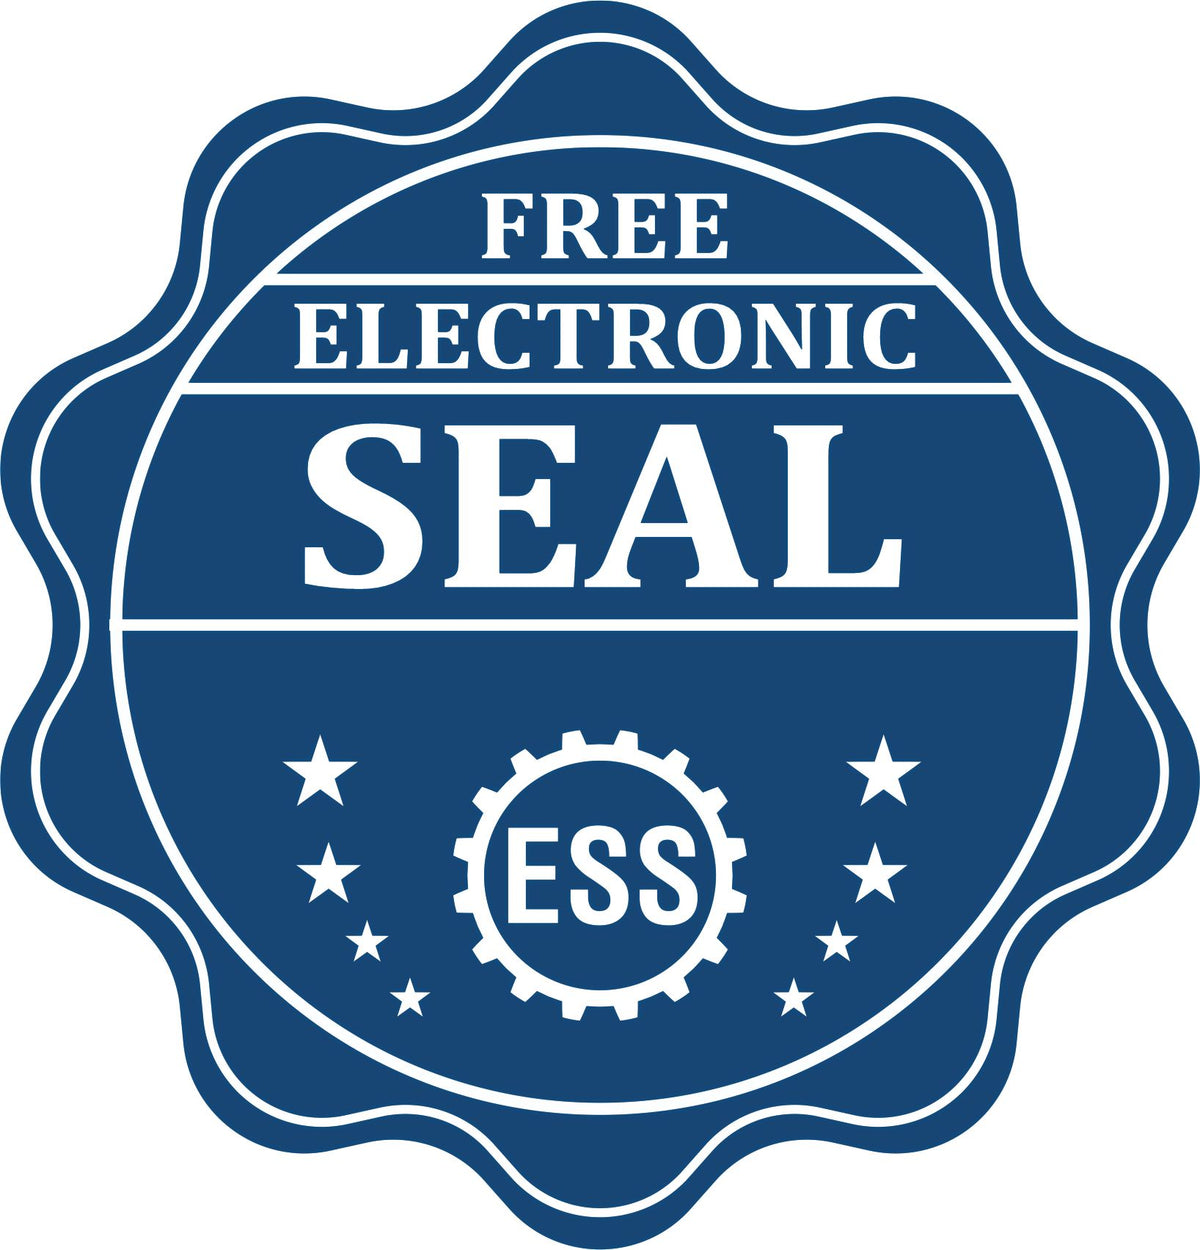 A badge showing a free electronic seal for the Super Slim Connecticut Notary Public Stamp with stars and the ESS gear on the emblem.